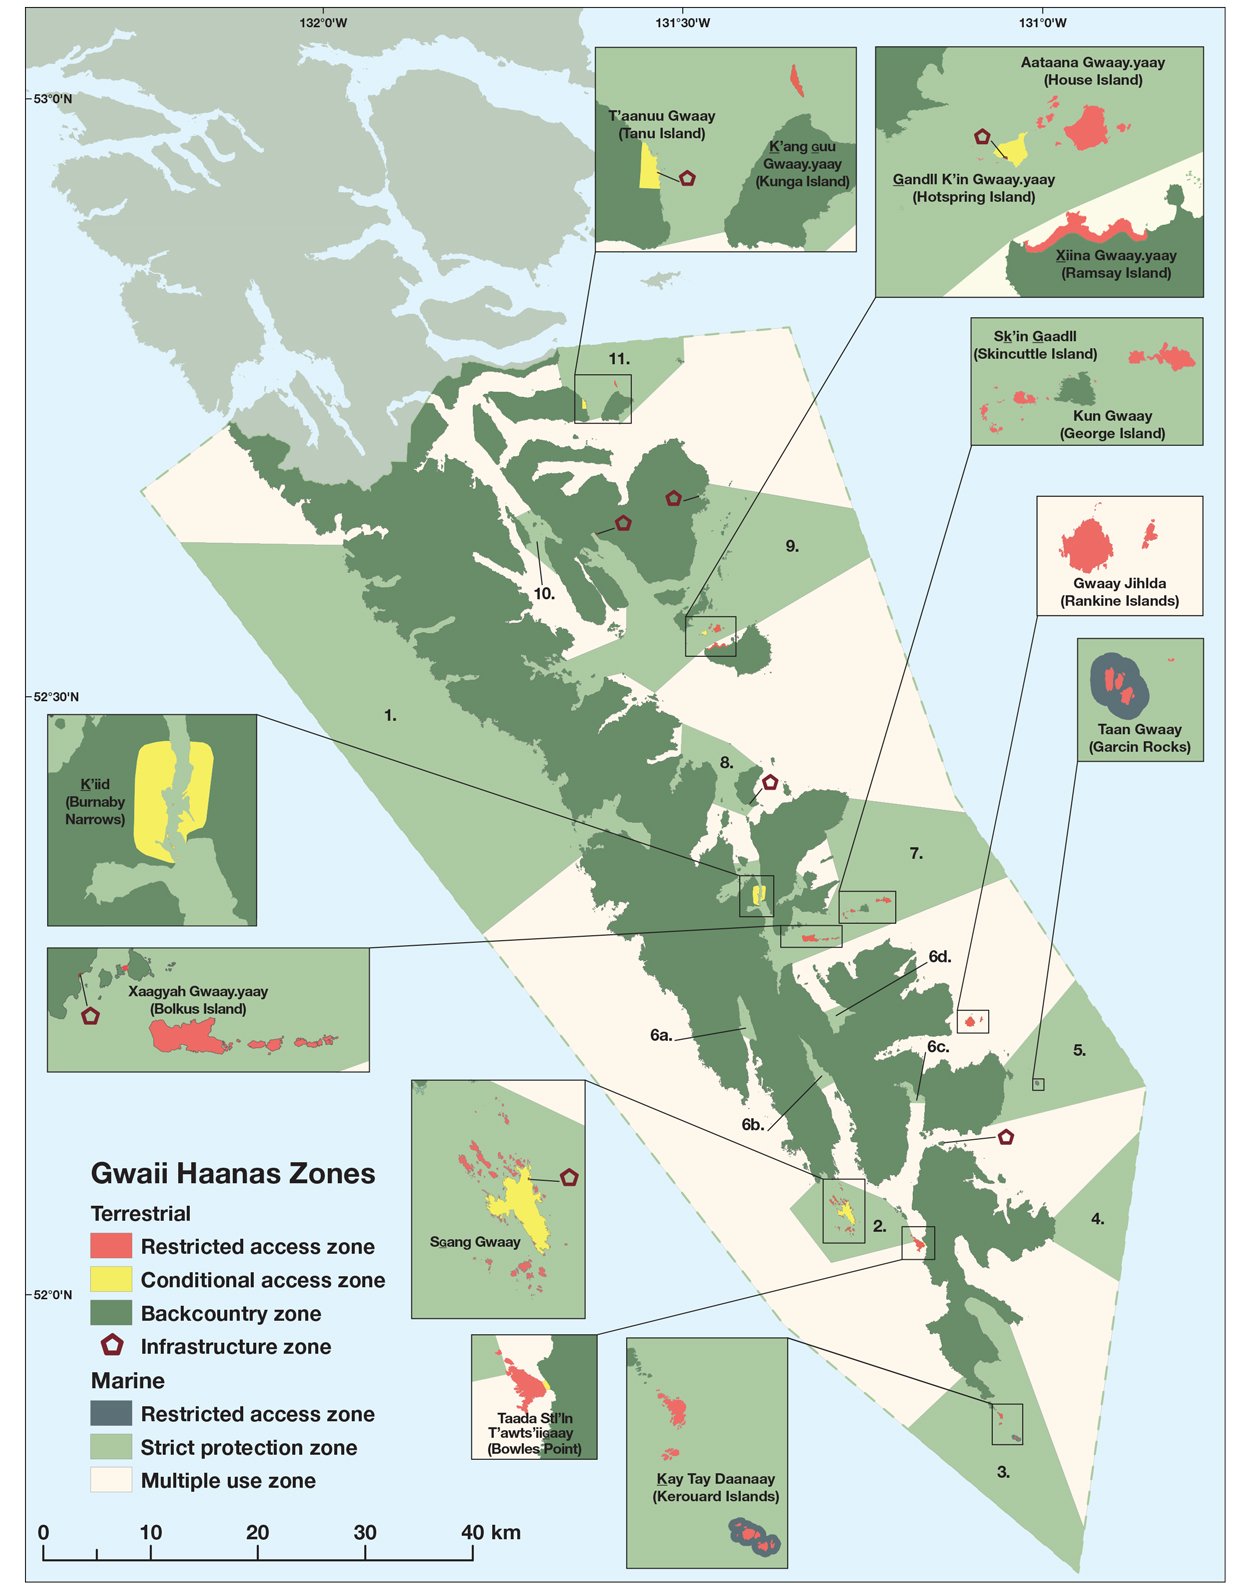 Map: Gwaii Haanas National Marine Conservation Area Reserve and Haida Heritage Site